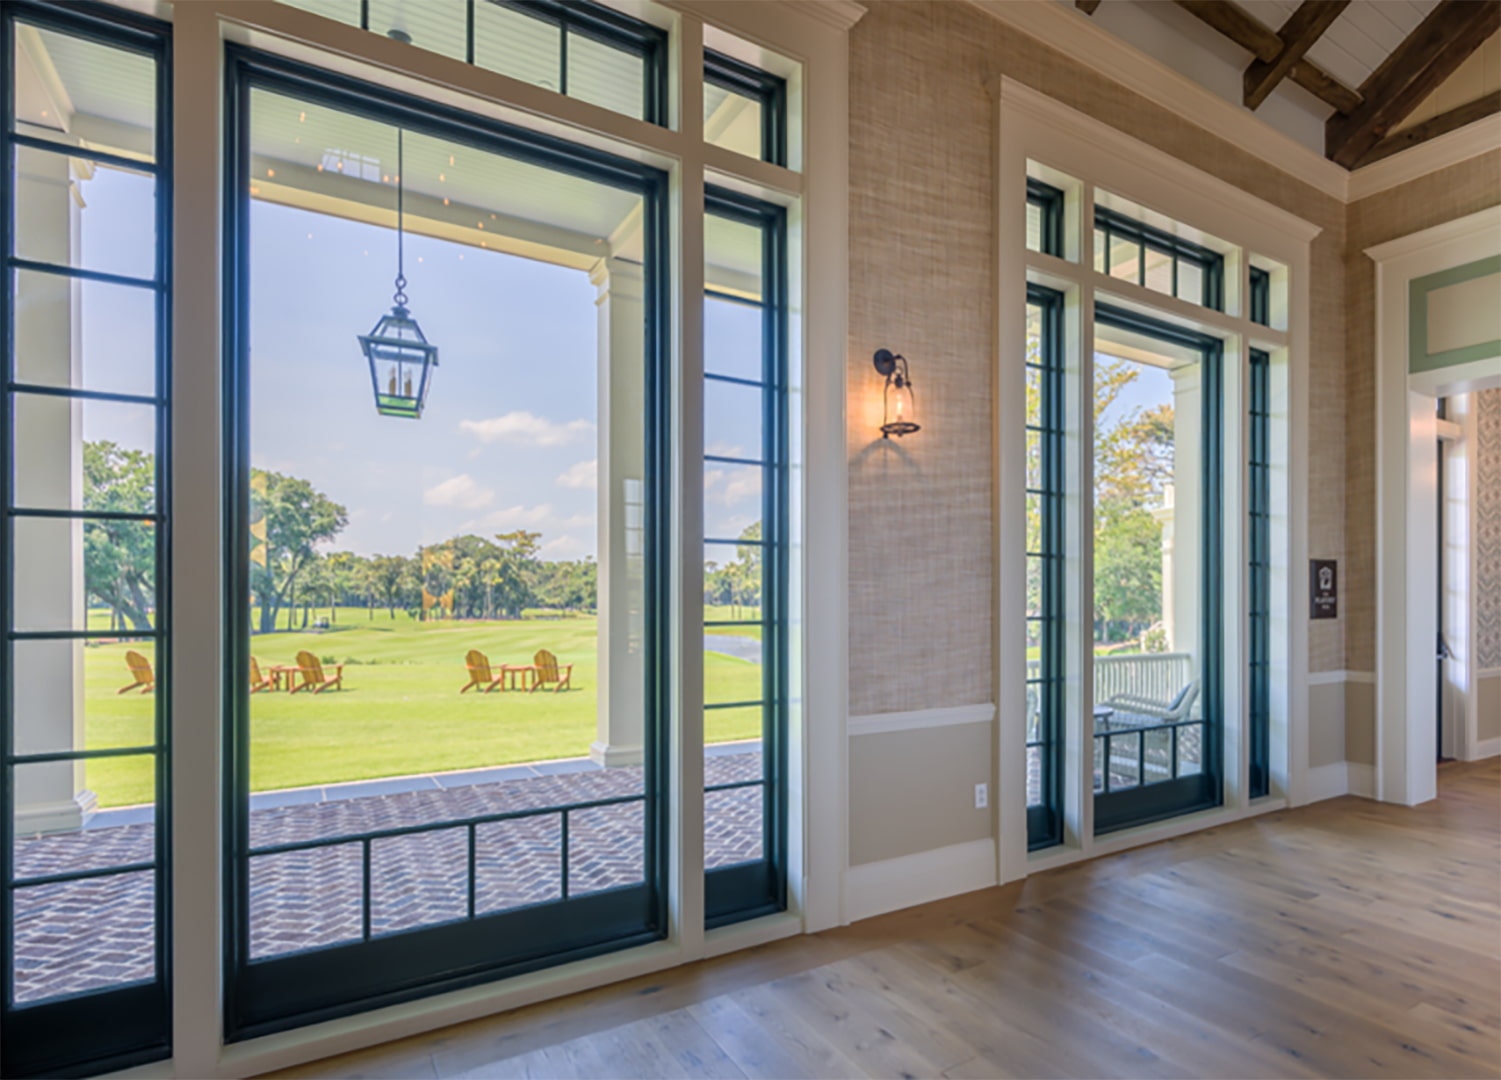 A open space interior features large black picture windows with simple grille patterns.